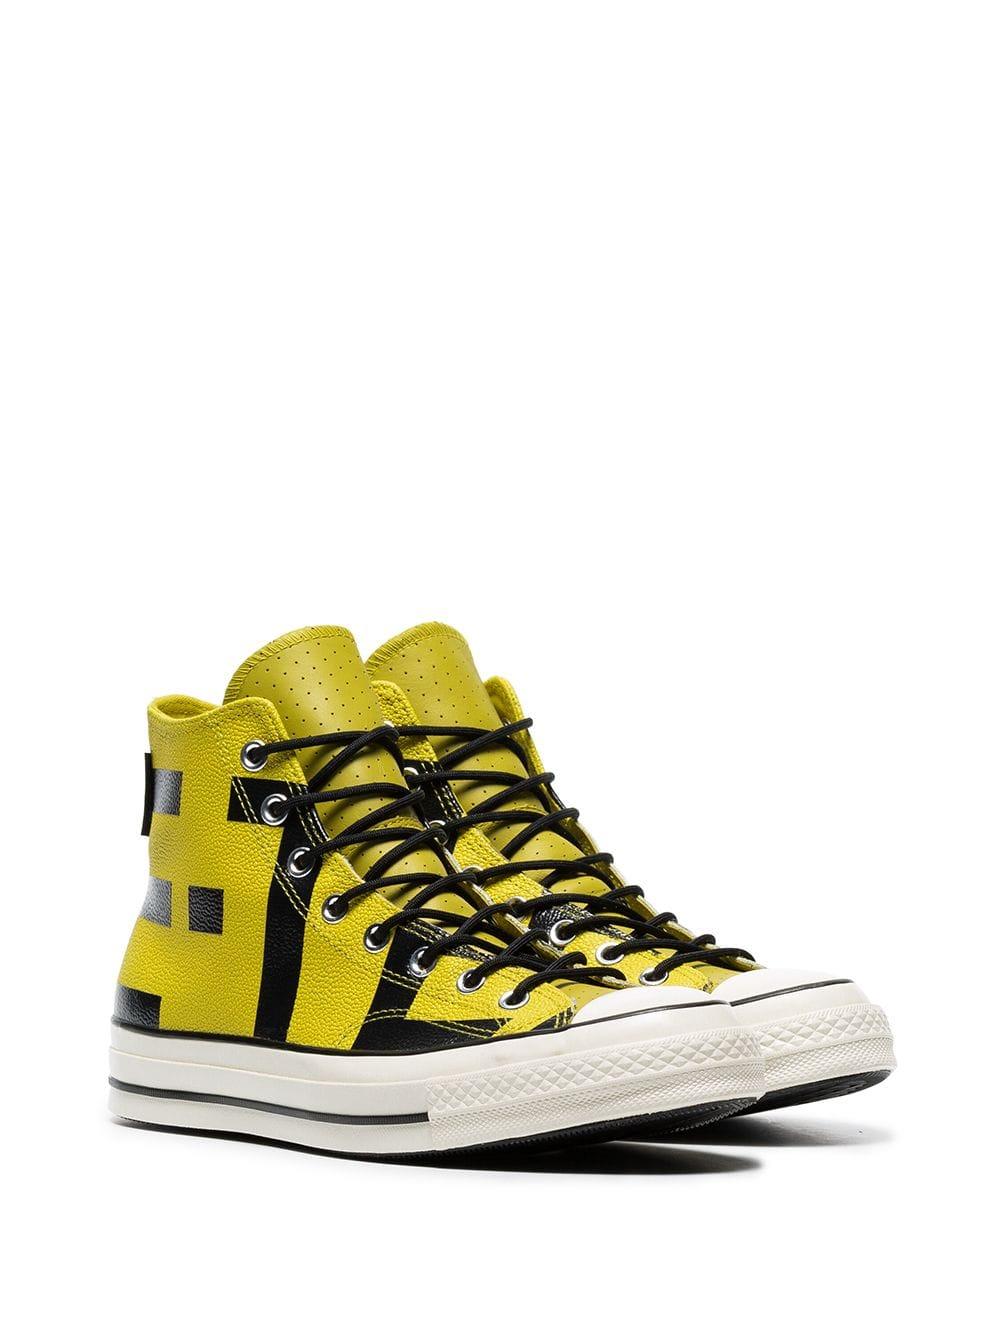 Converse Canvas Yellow Chuck Taylor Goretex Sneakers for Men - Lyst